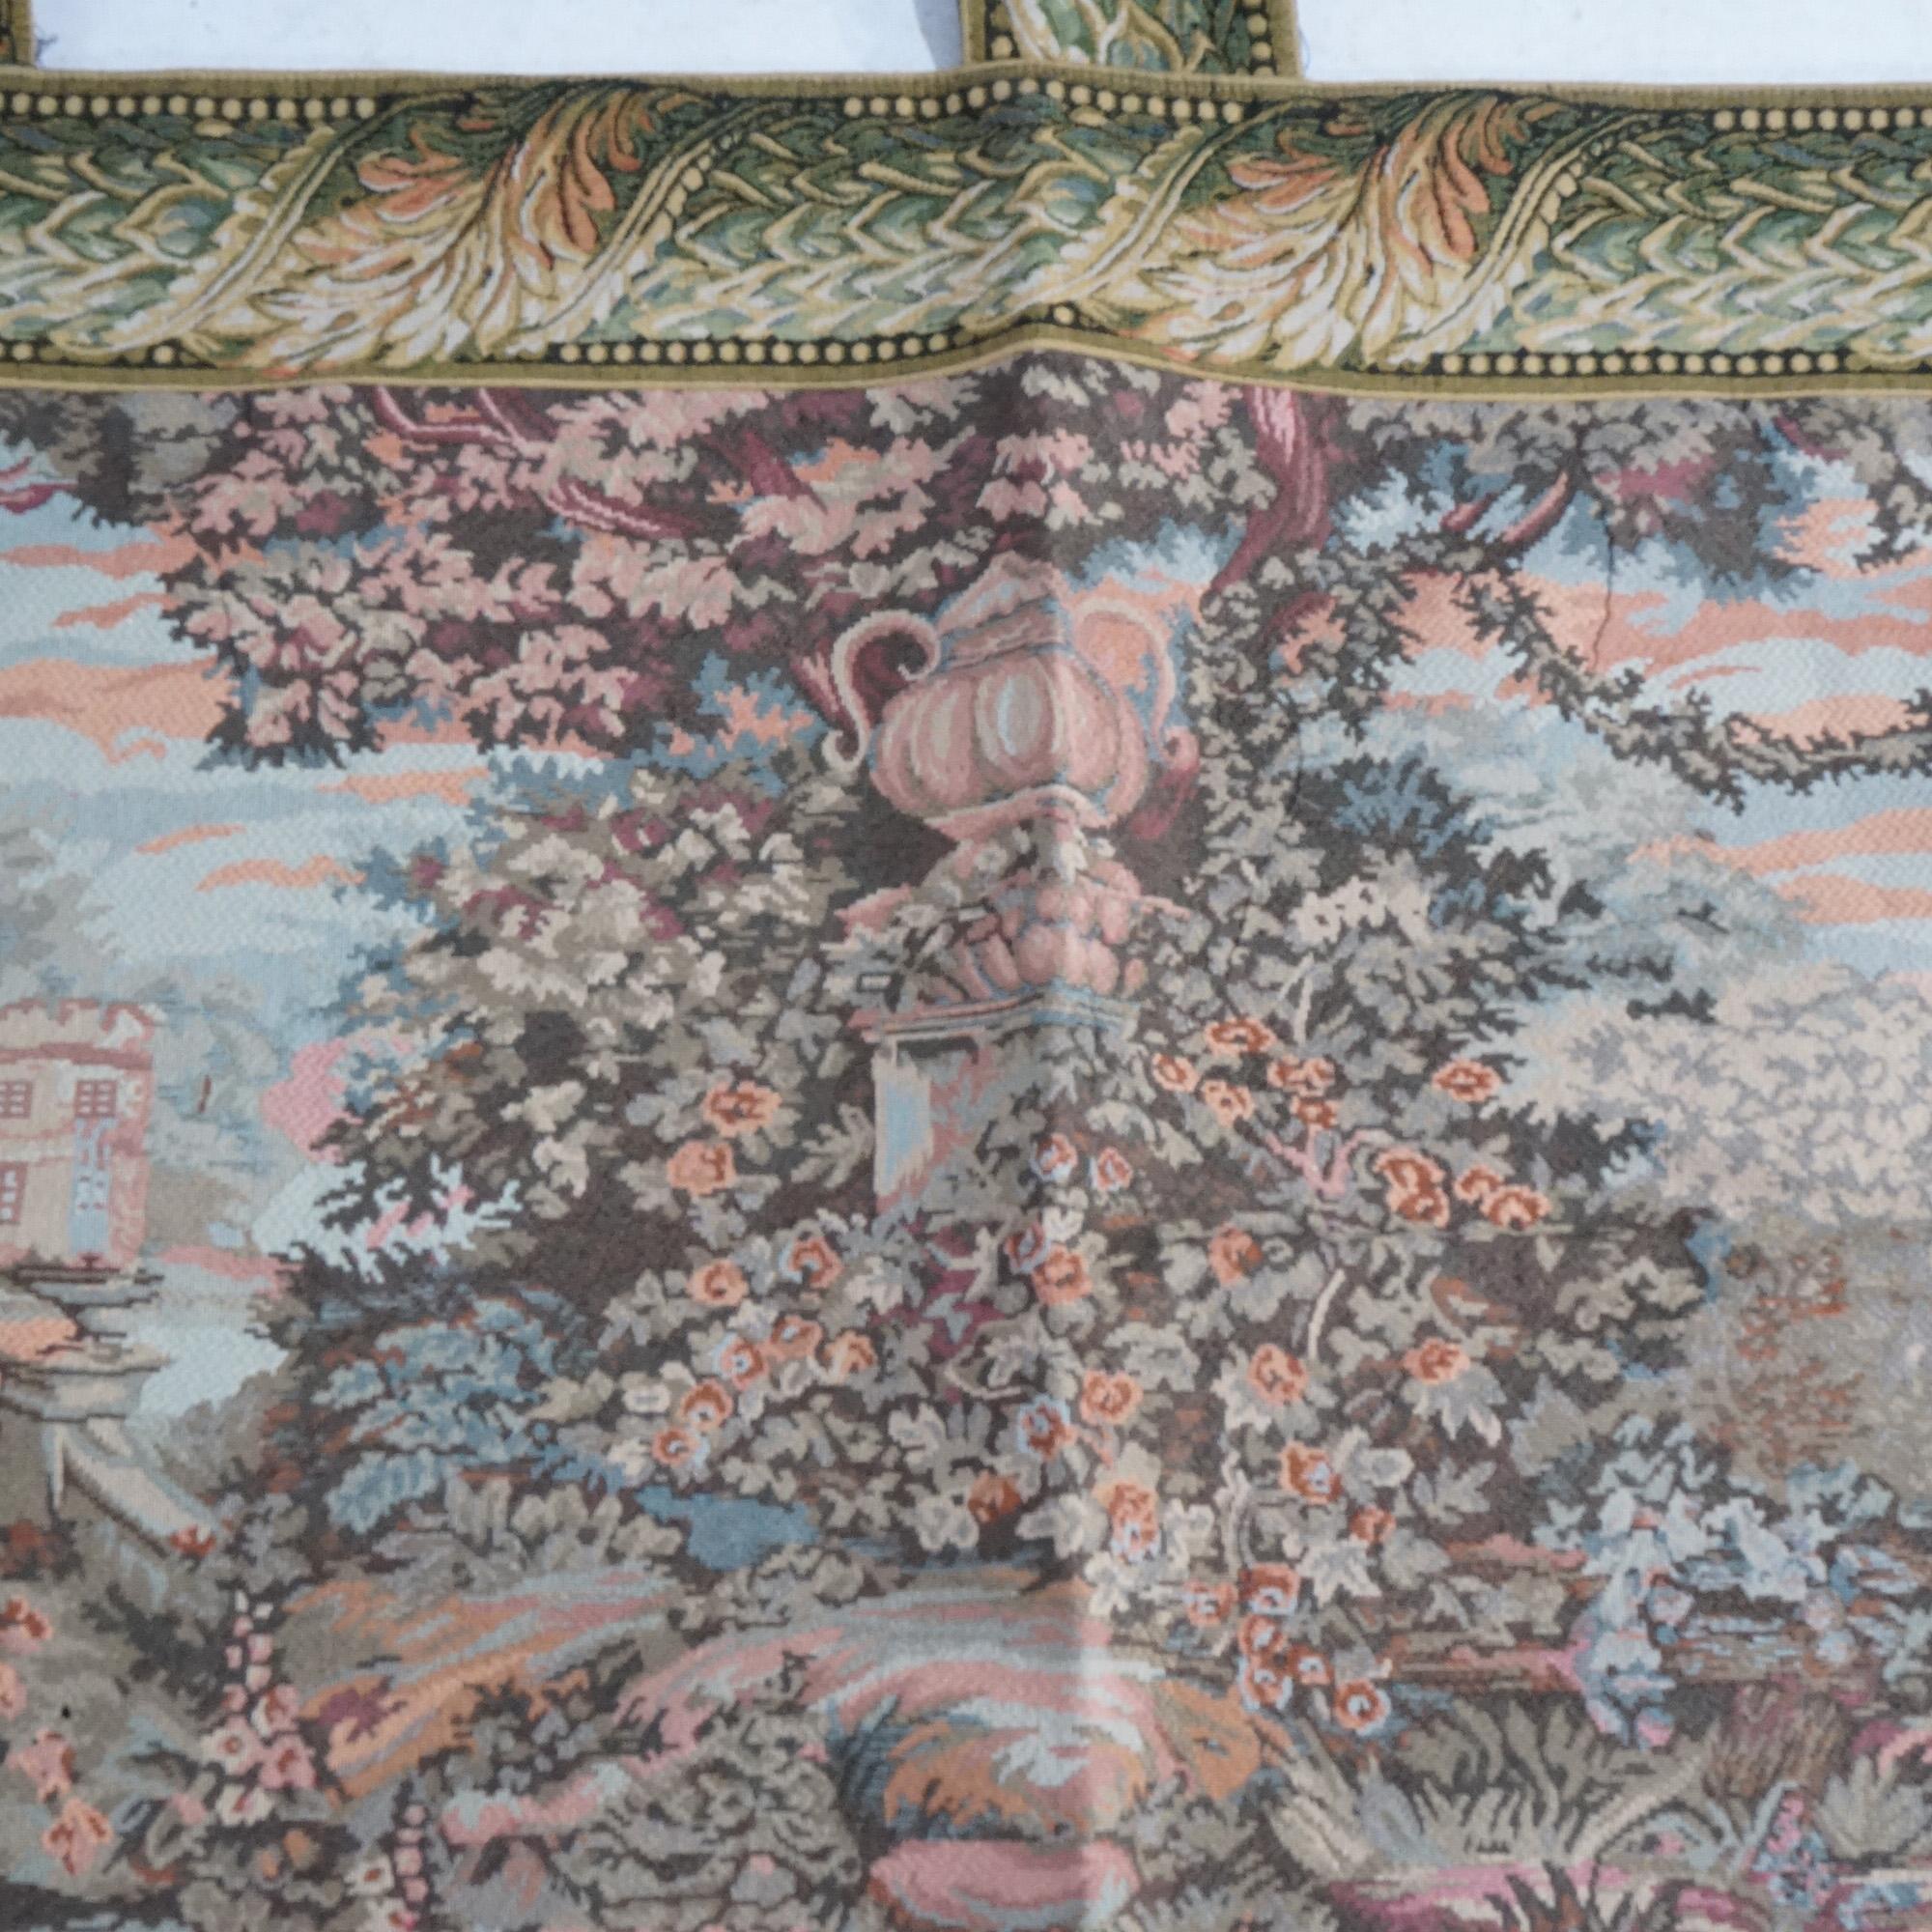 Contemporary Greco-Roman Scenic Courtyard Wall Tapestry with Figures 20th In Good Condition For Sale In Big Flats, NY